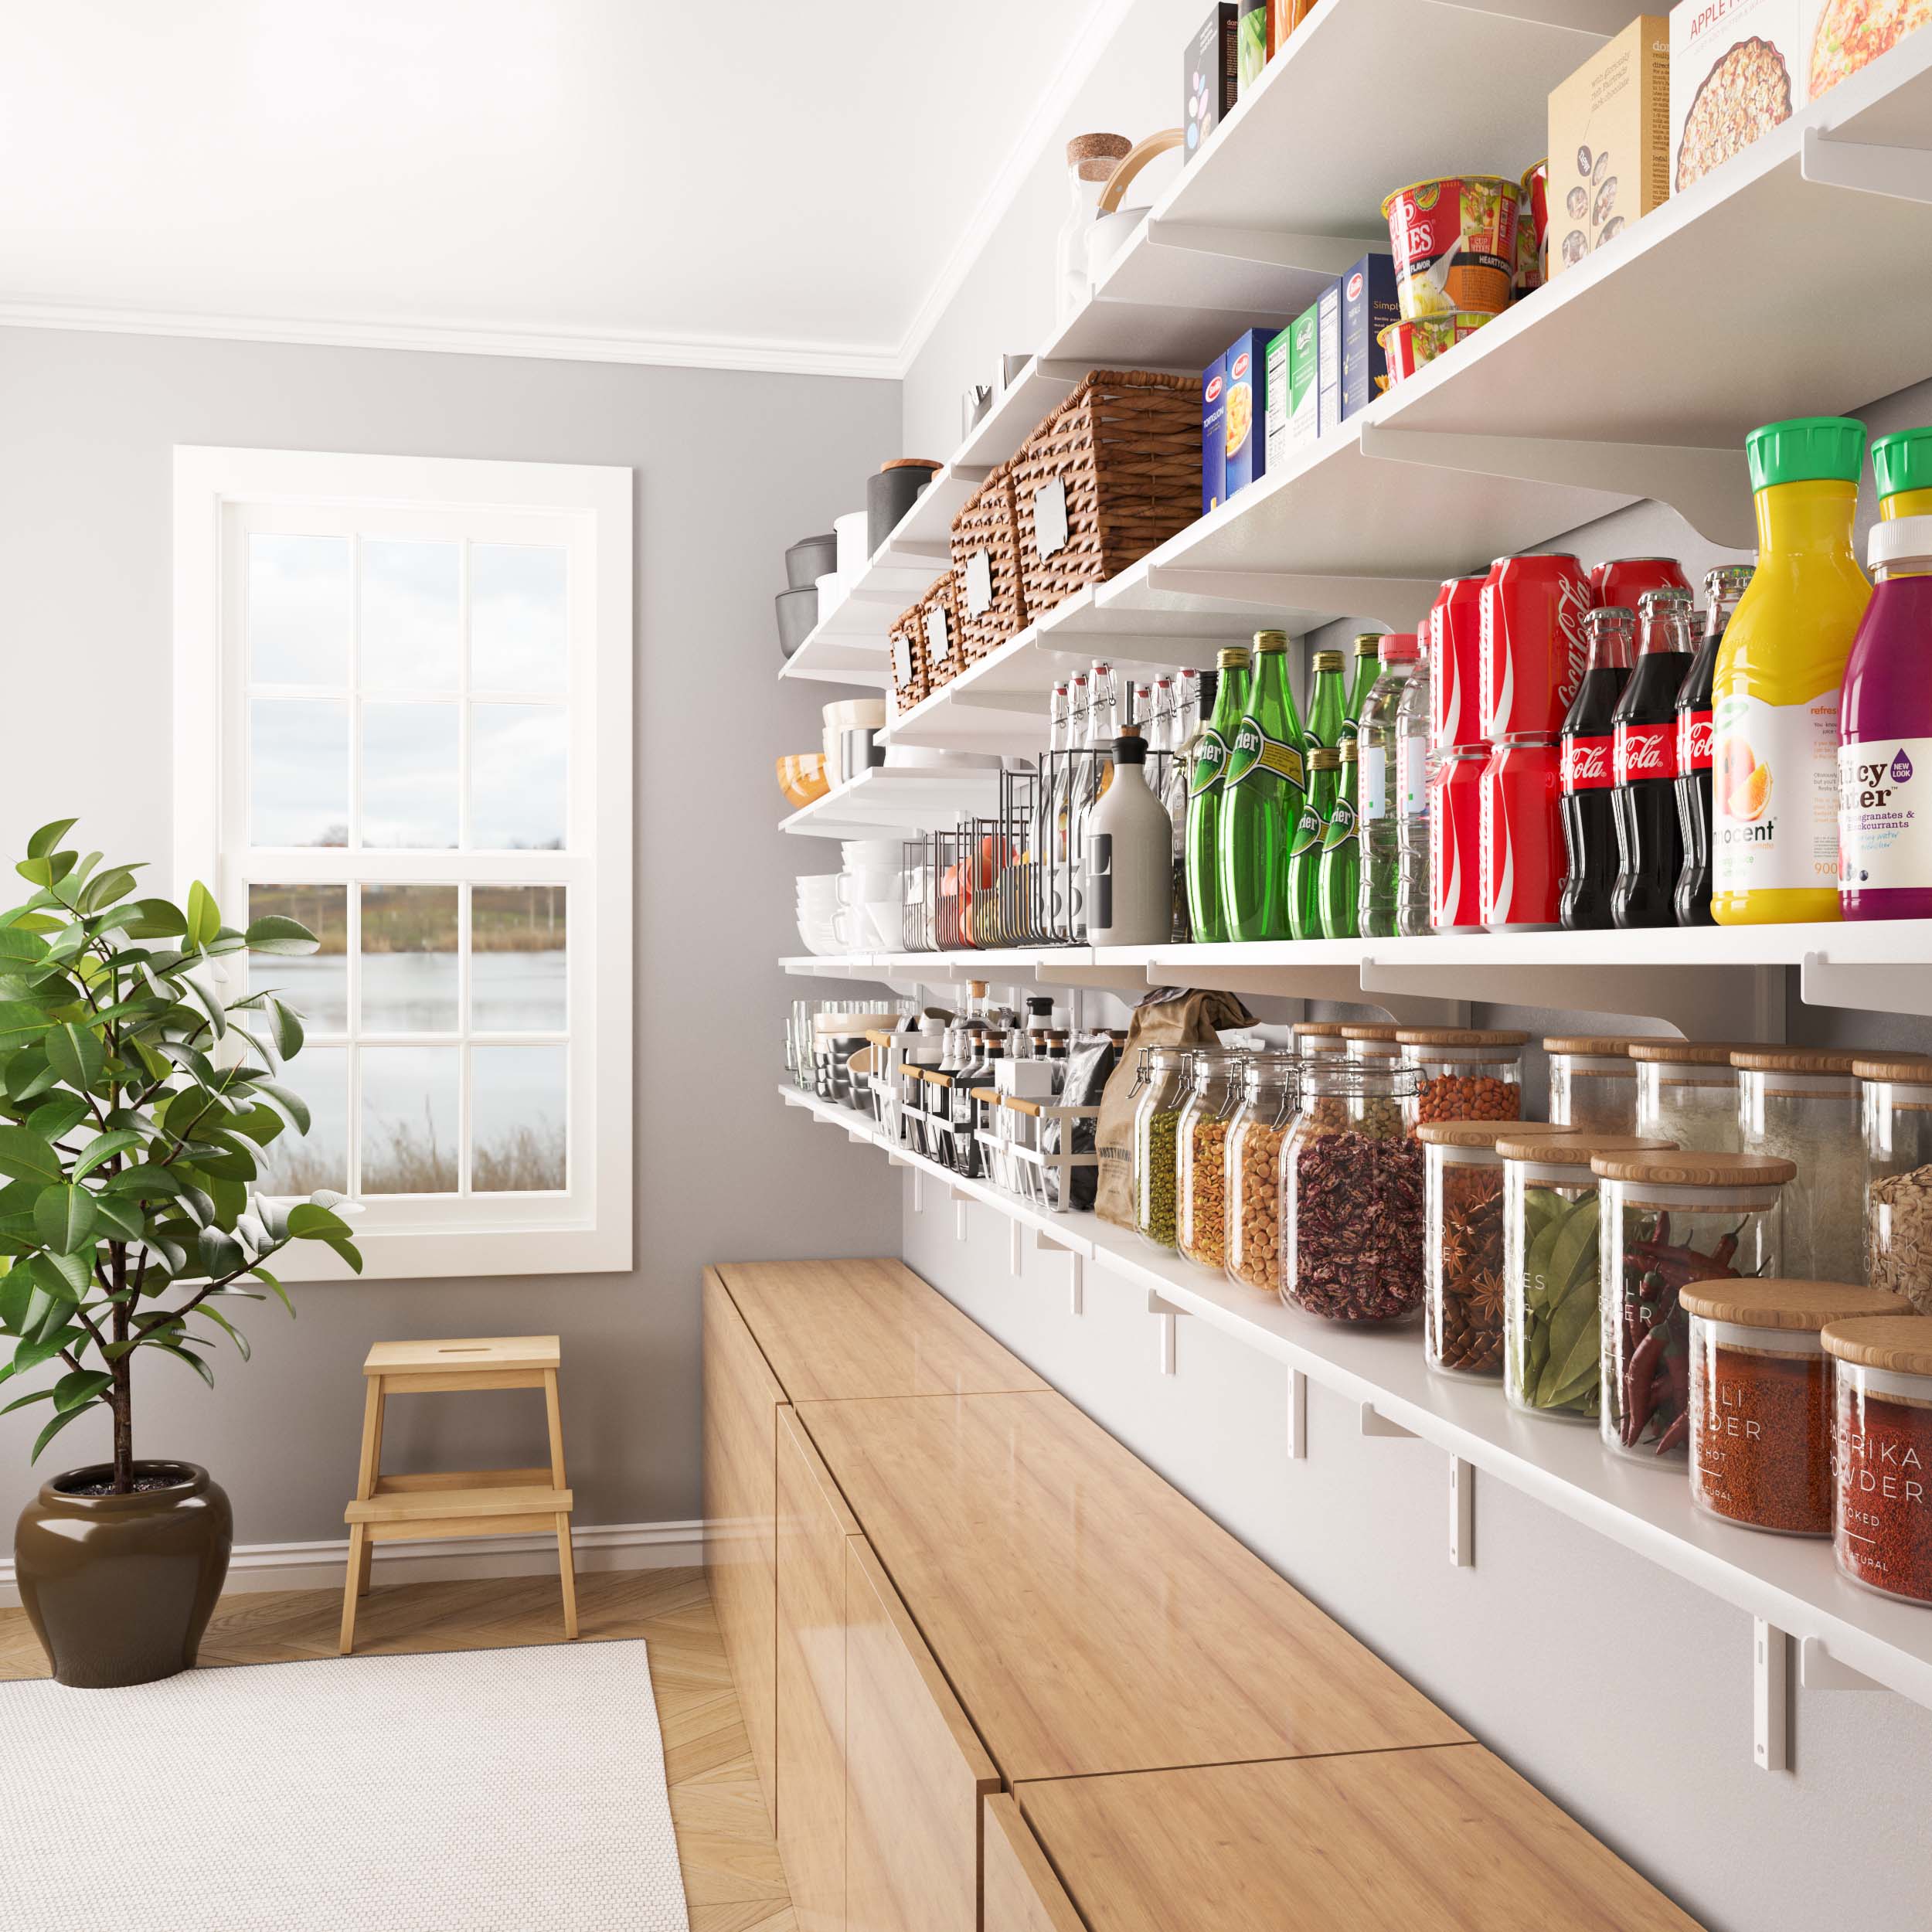 A pantry area with open 4 tier shelving unit storing food, jars, bottles, and kitchenware.